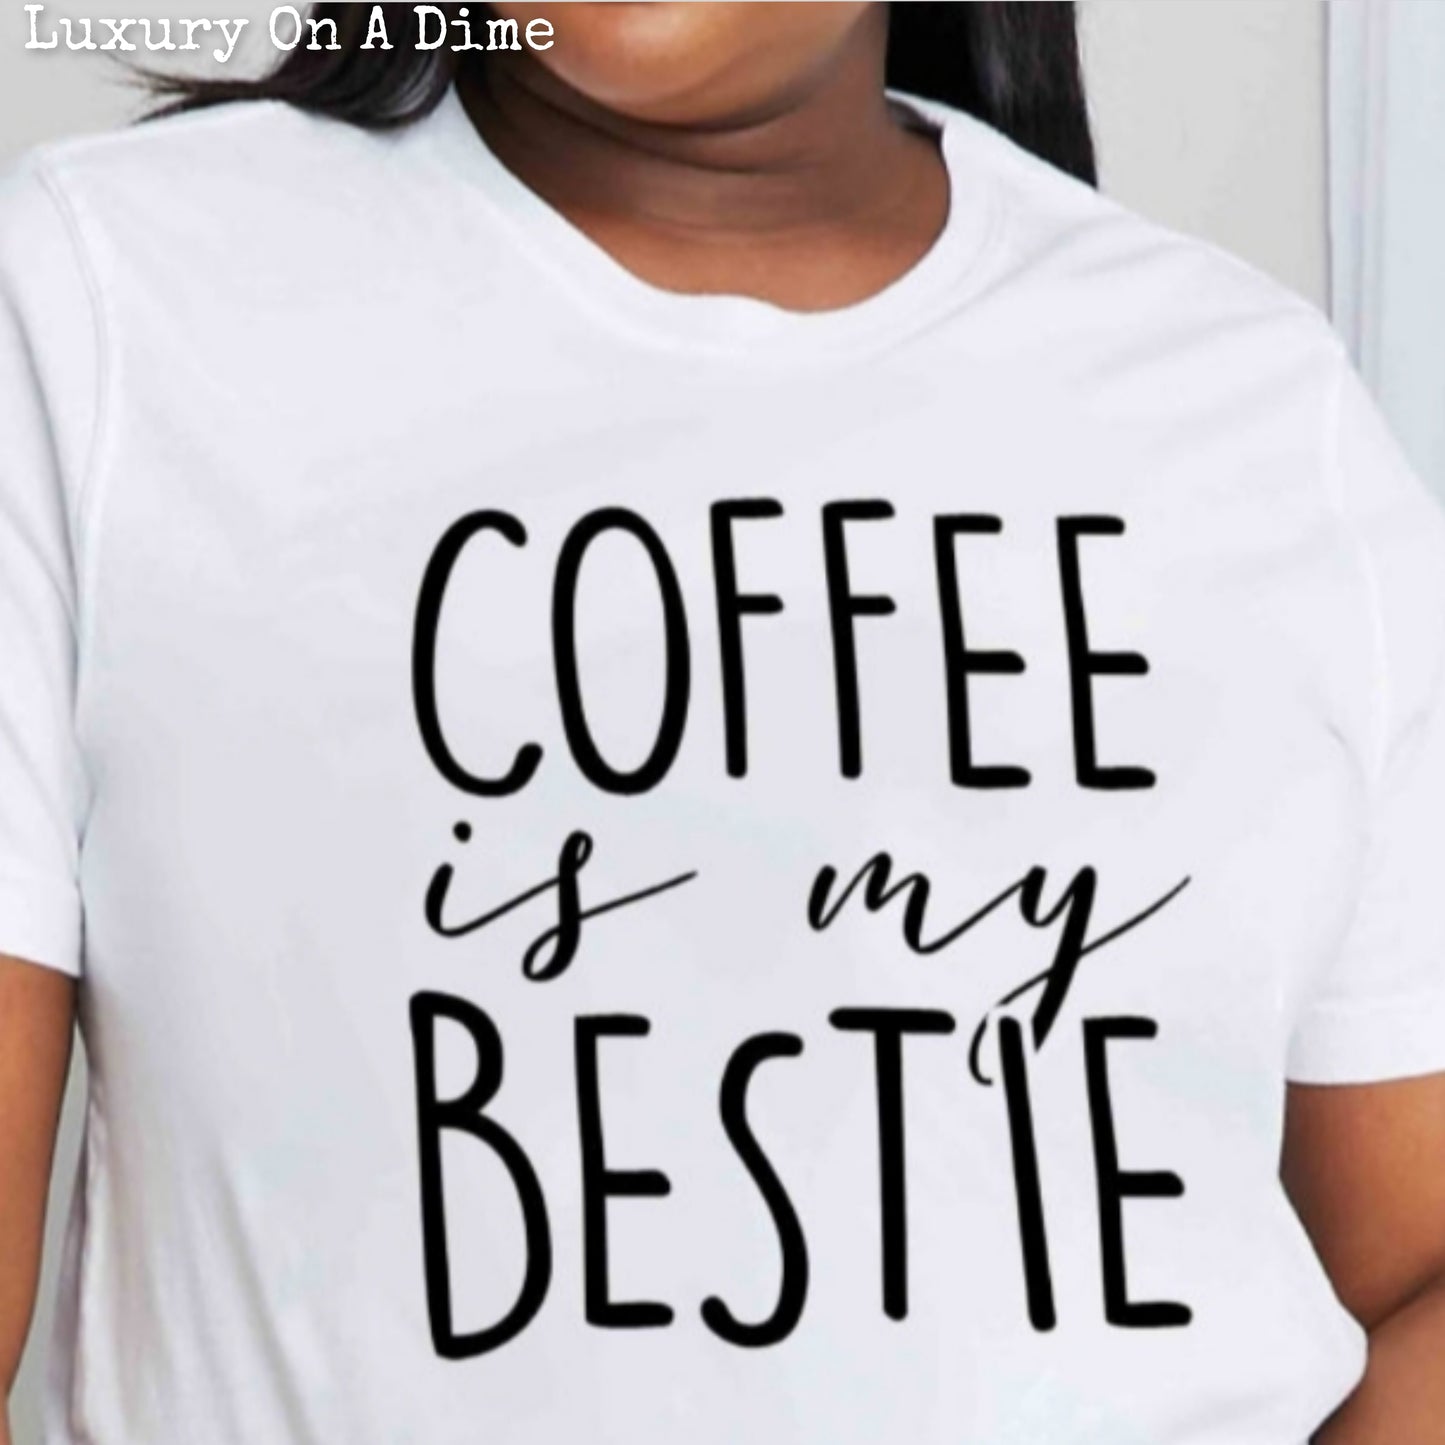 Funny COFFEE IS MY BESTIE Graphic 100% Cotton Tee Shirt (Plus Size Available)